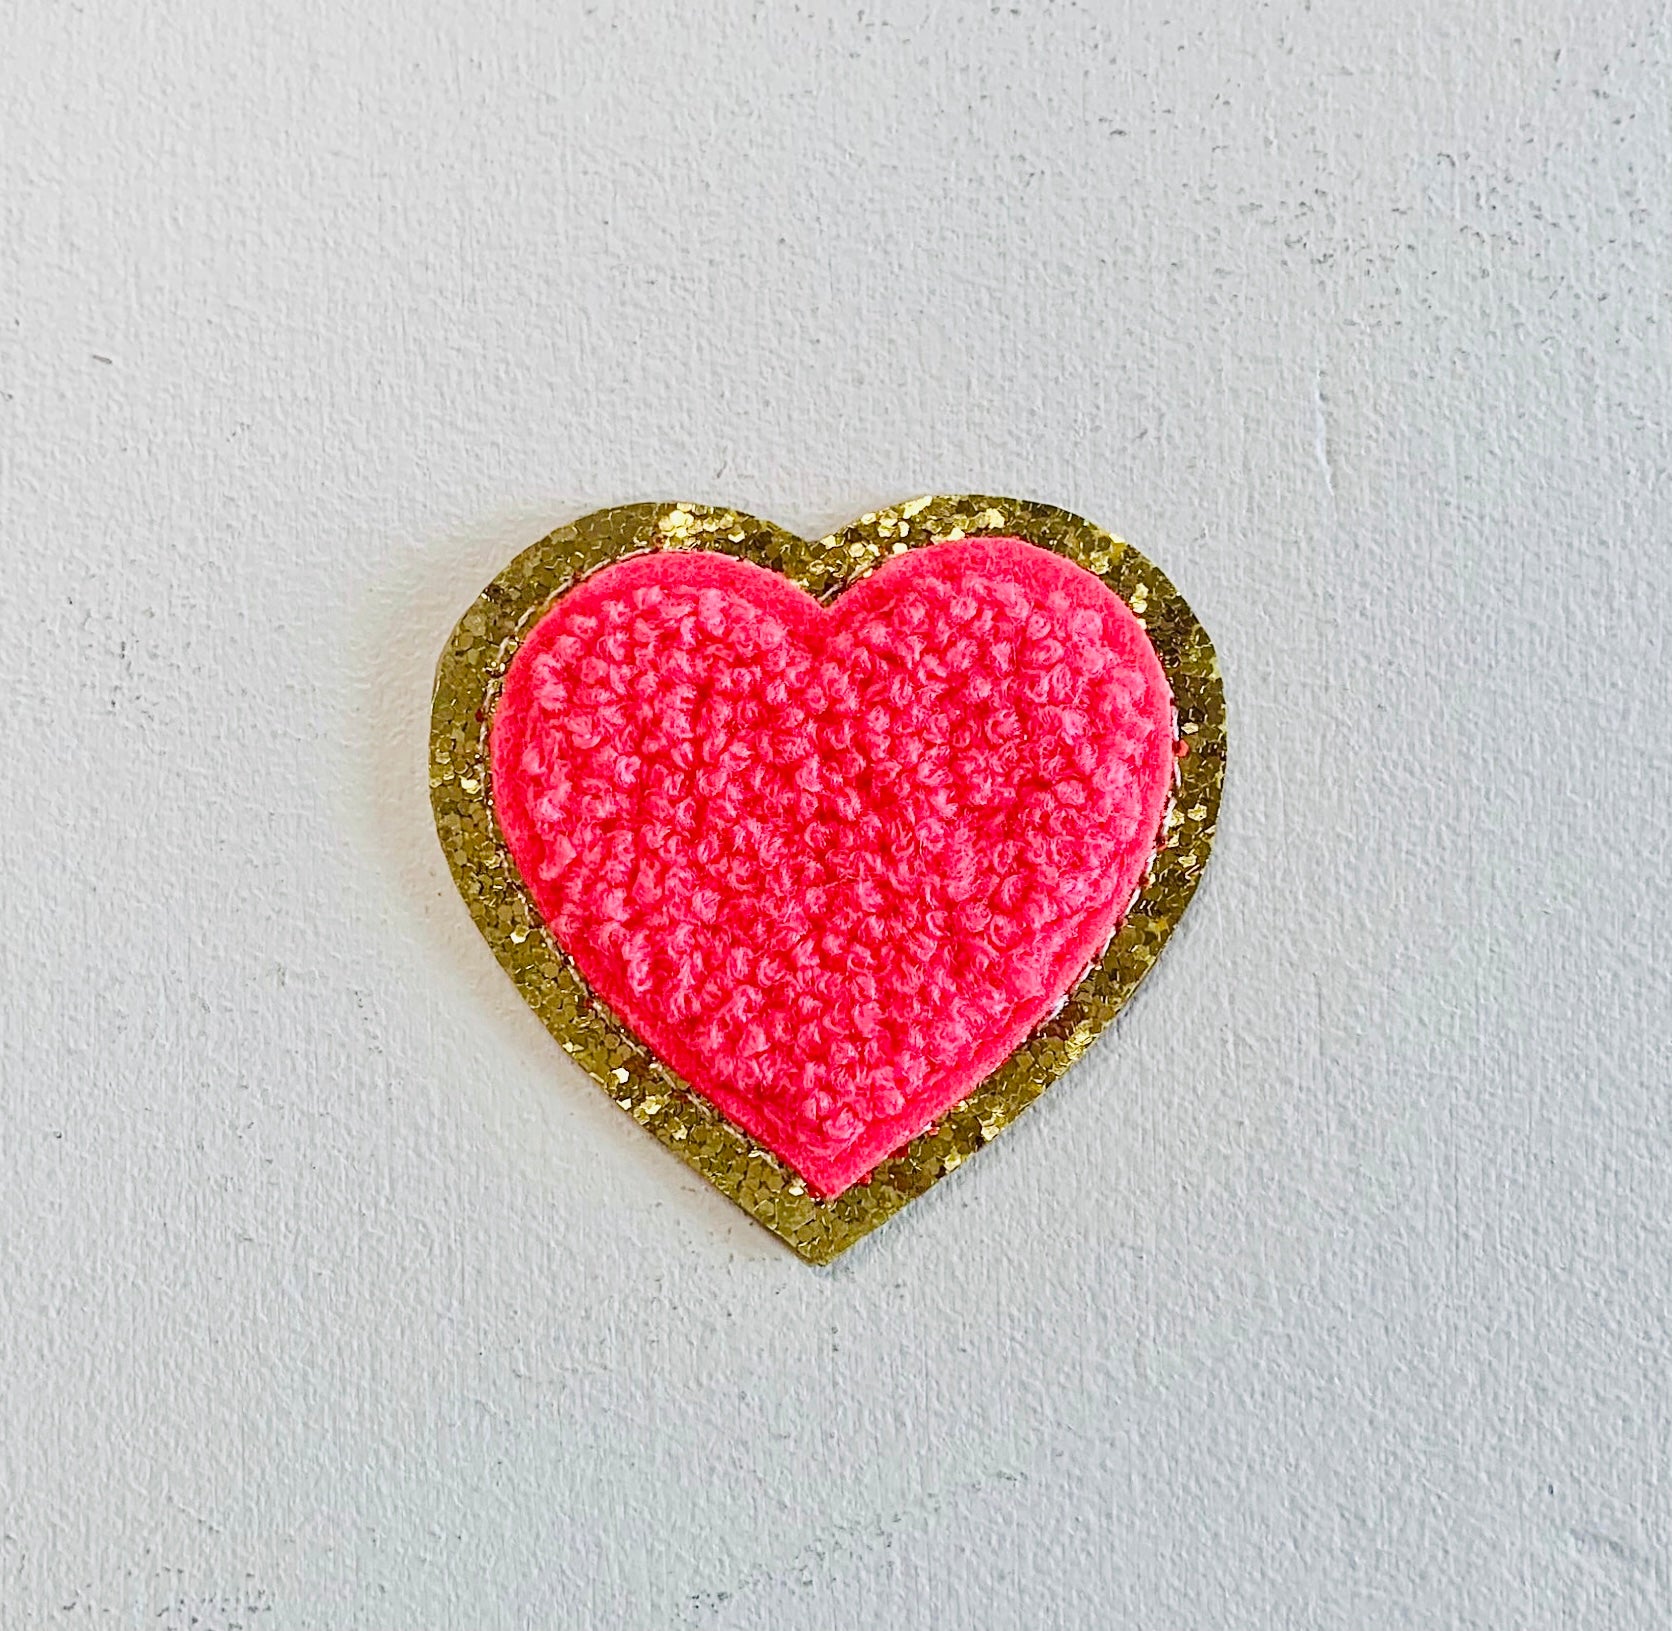 Chenille Heart Patches – Golden Thread, Inc.